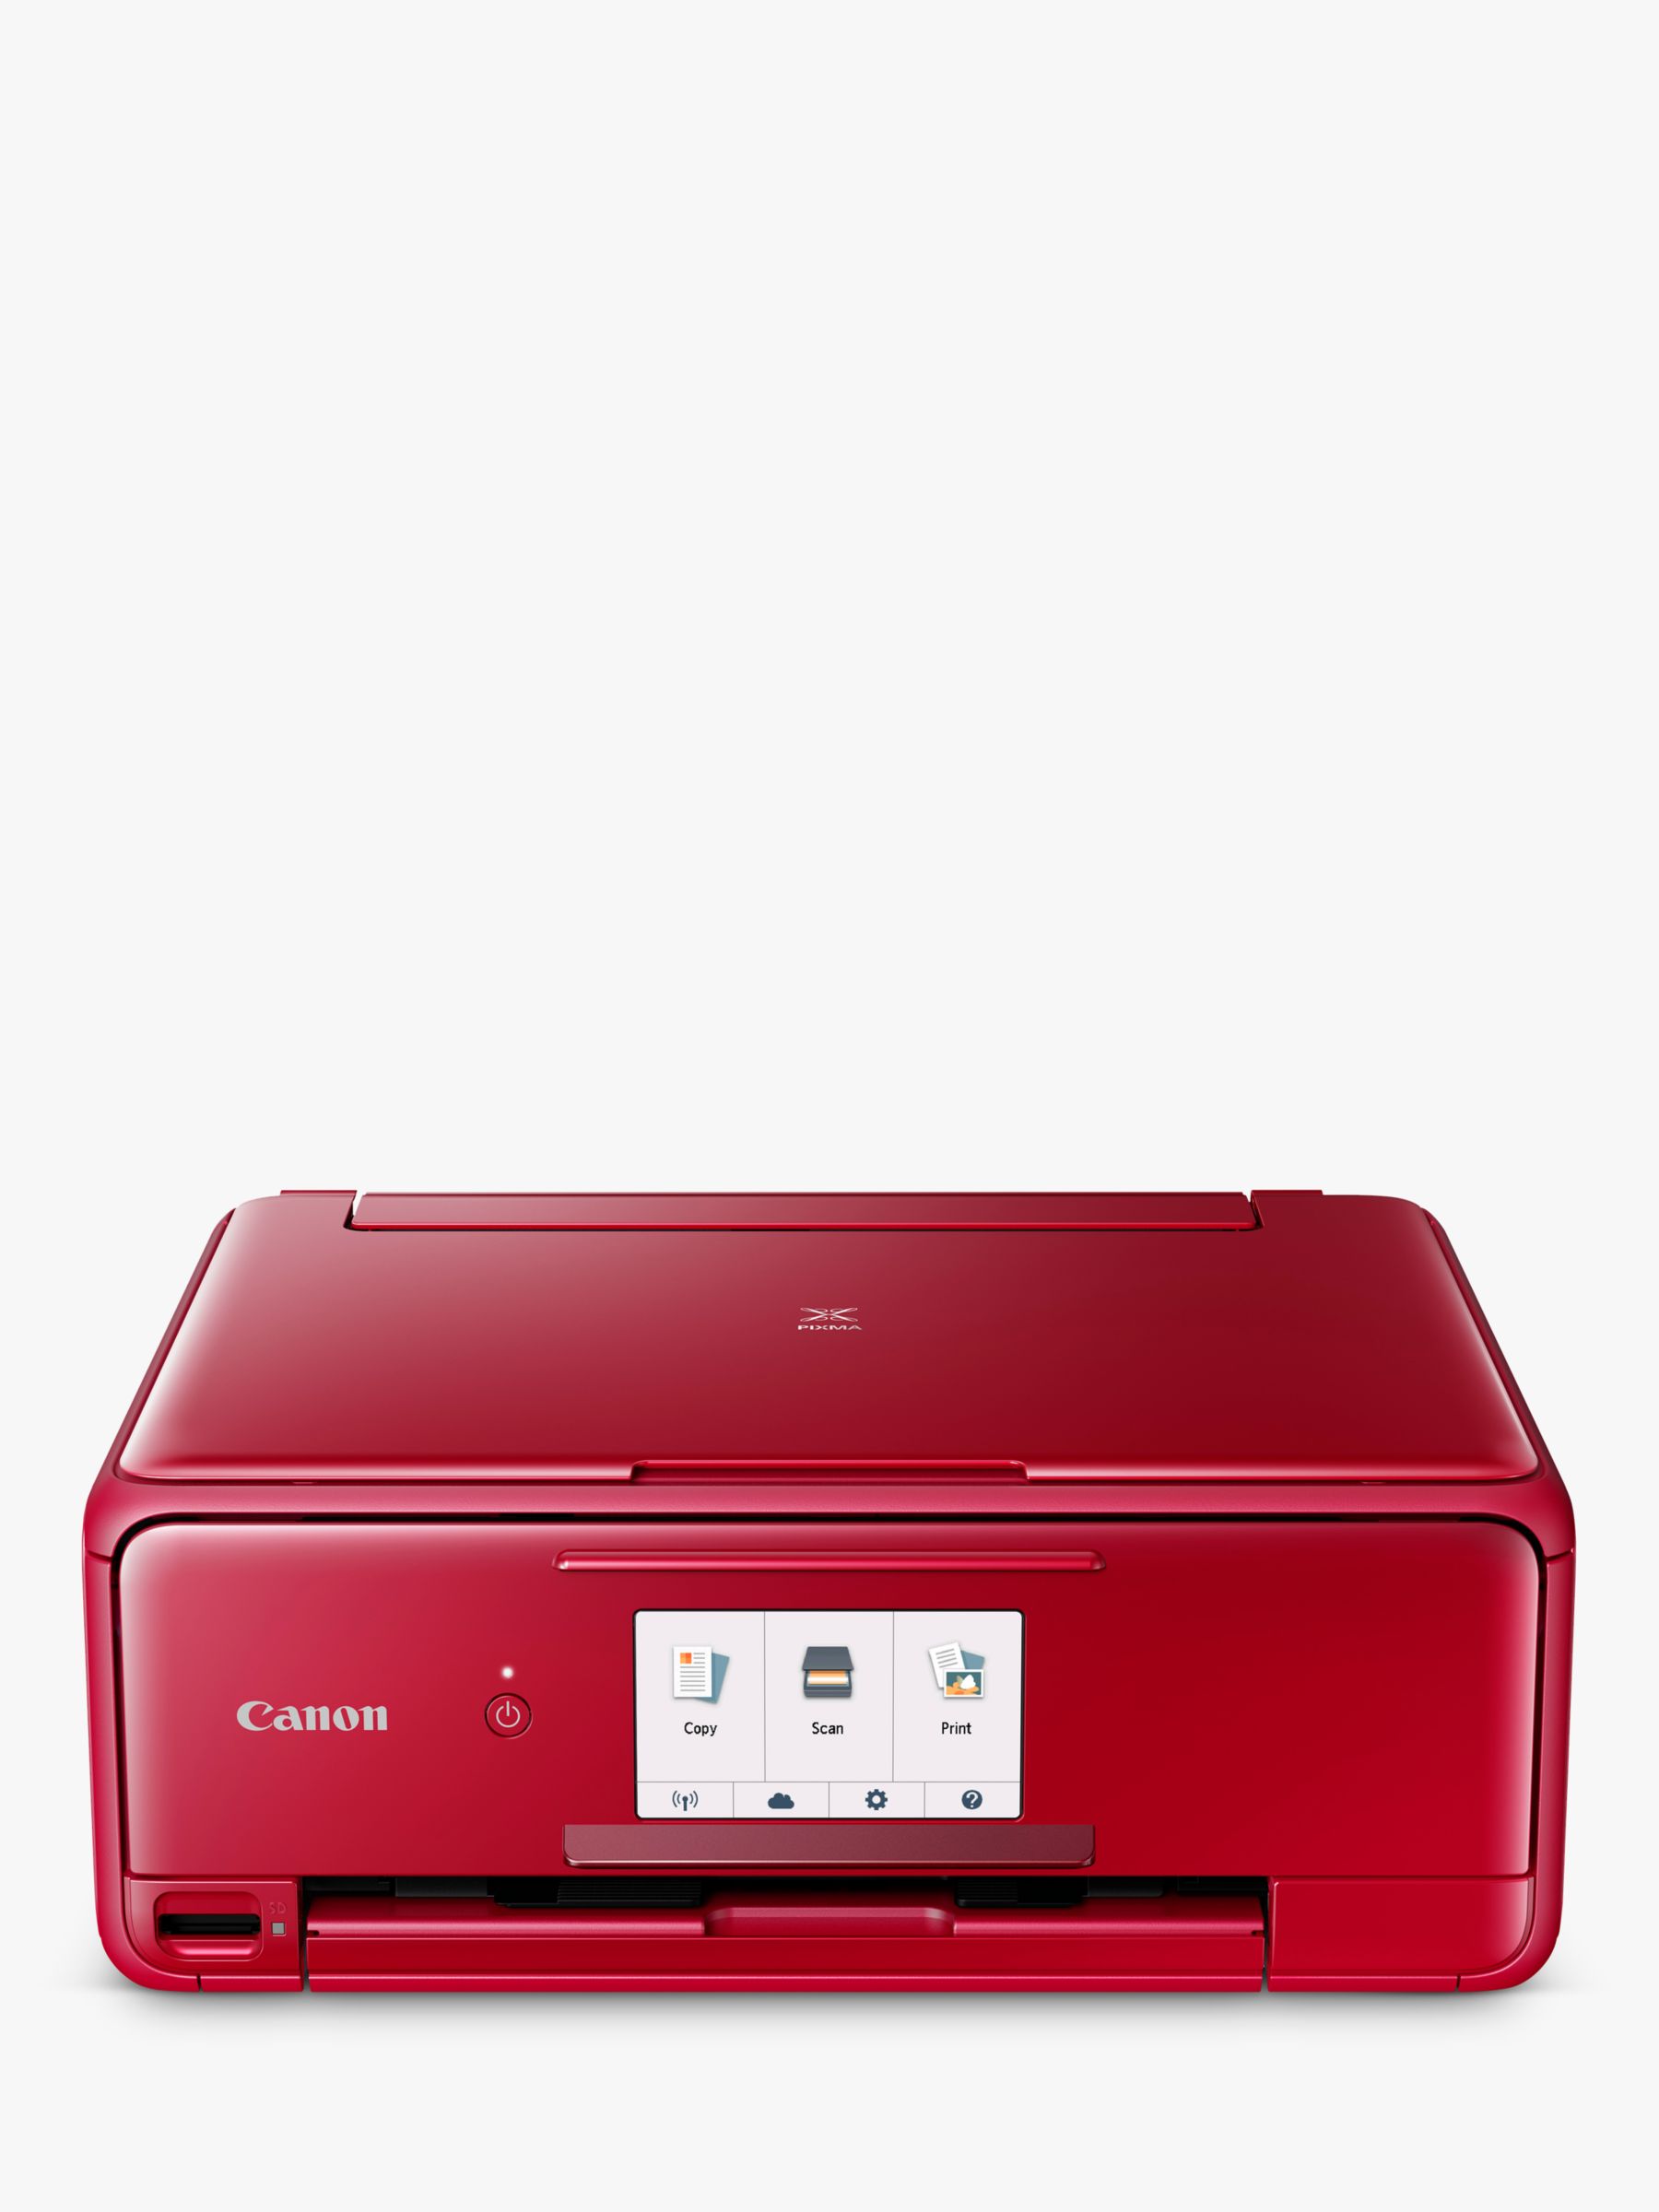 Canon PIXMA TS8152 All-in-One Wireless Wi-Fi Printer with Auto-Tilting Touch Screen, Red Review thumbnail